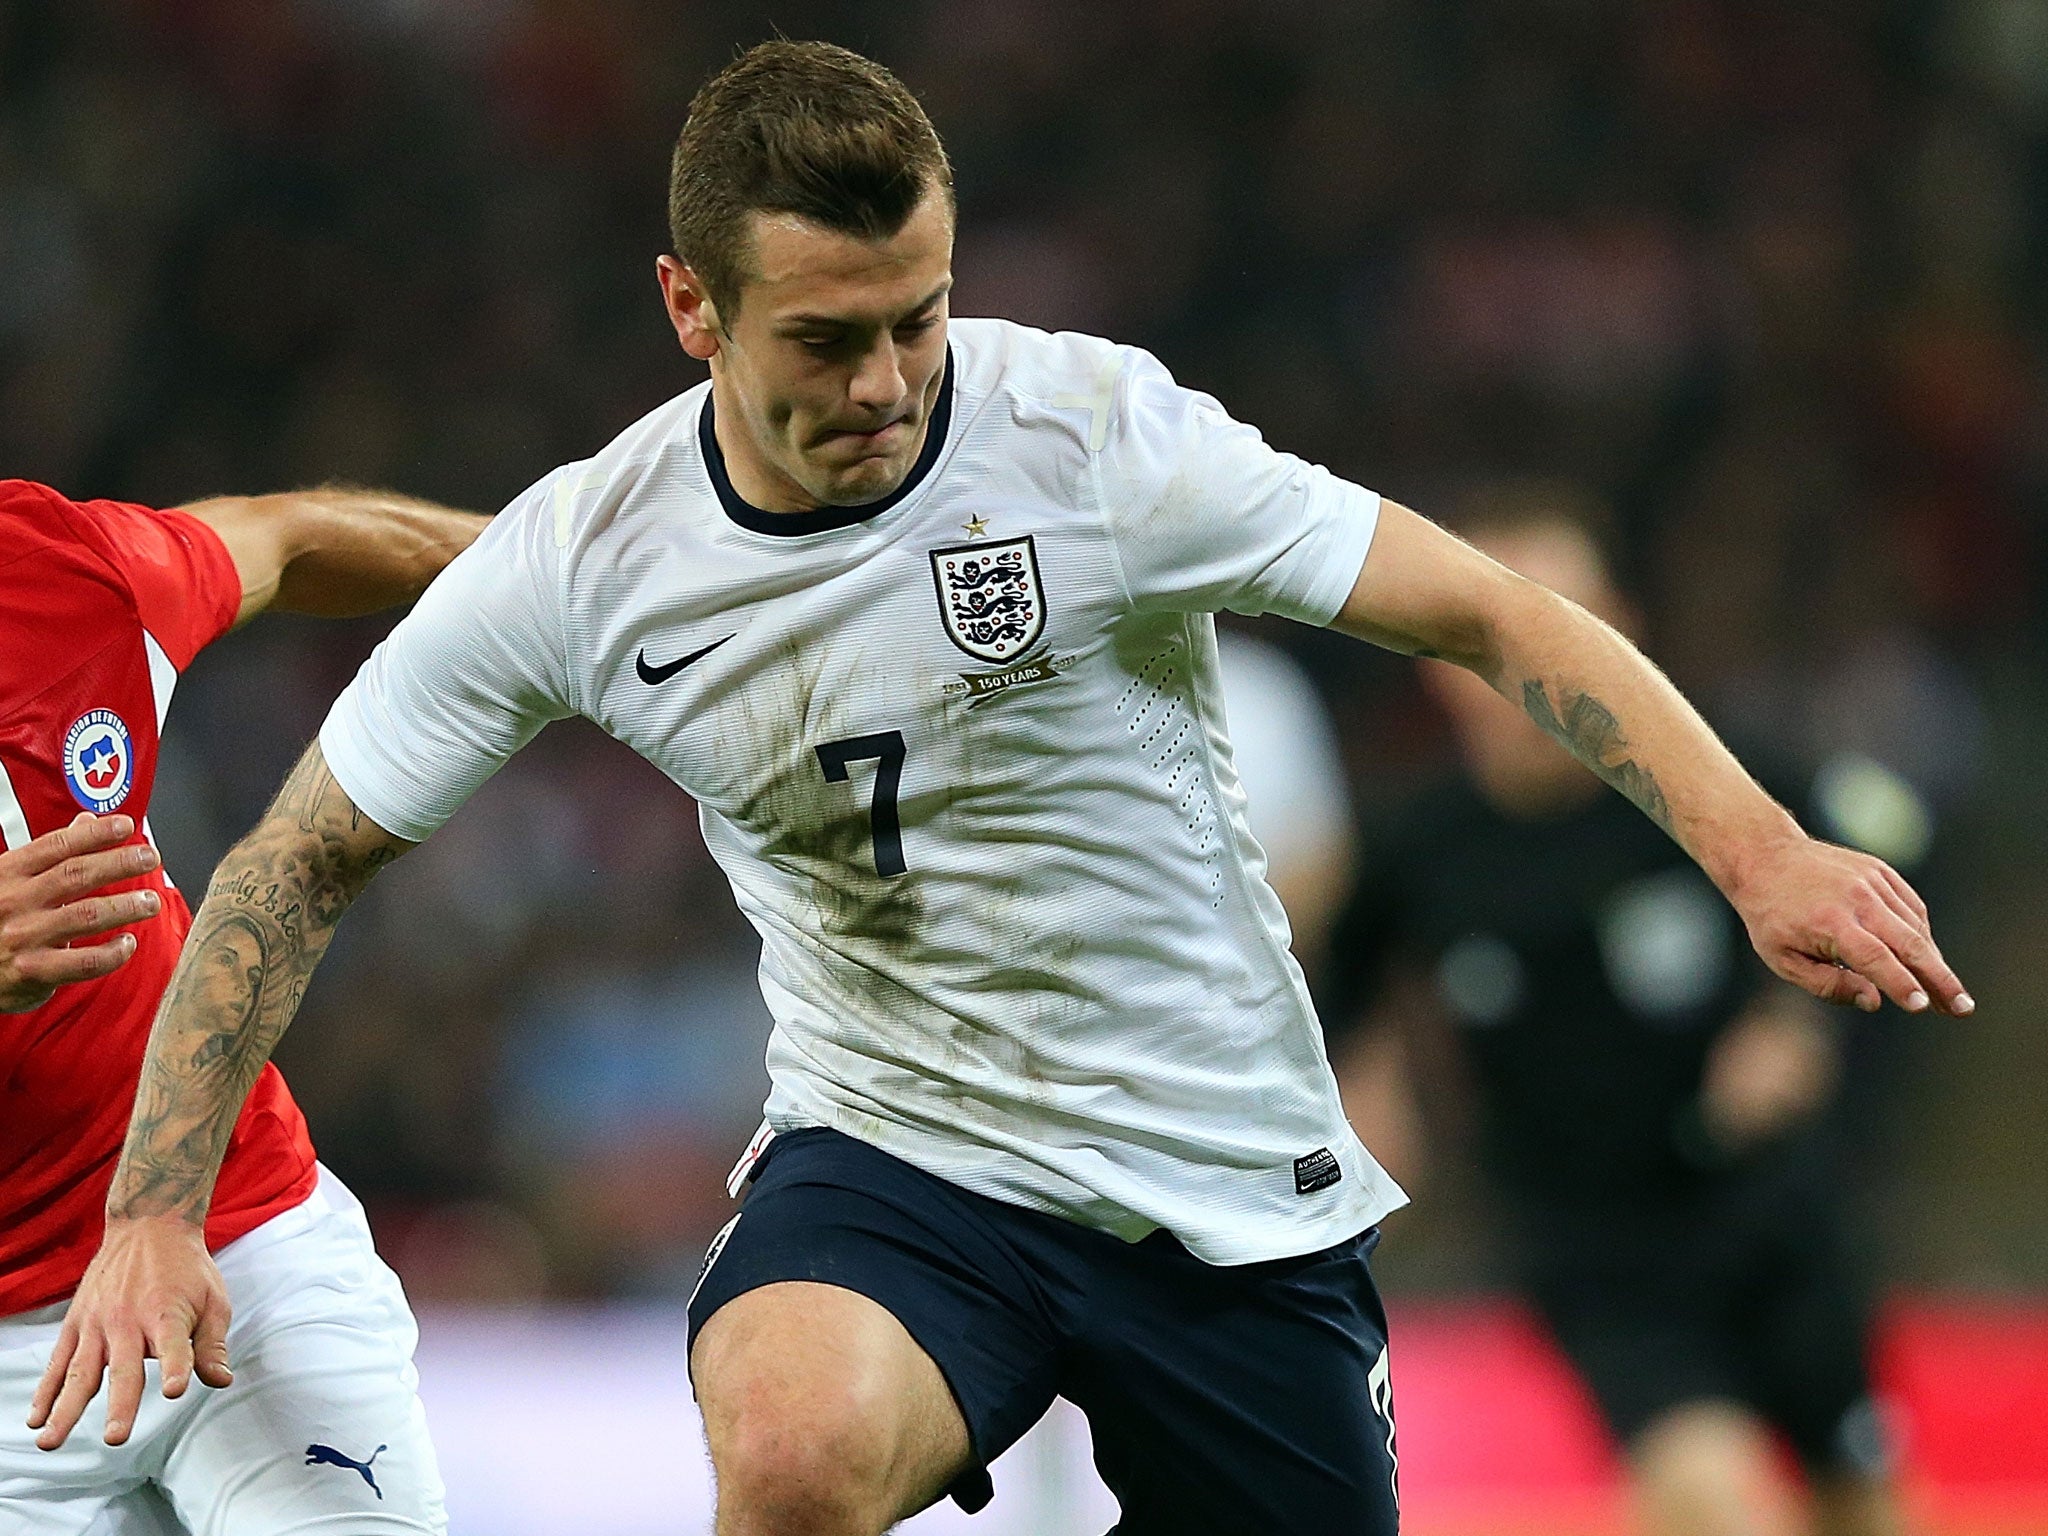 Jack Wilshere Restored to line-up after bench-warming spells for club and country. One forceful run halted by Beausejour and stung hands of Bravo from outside area. 7